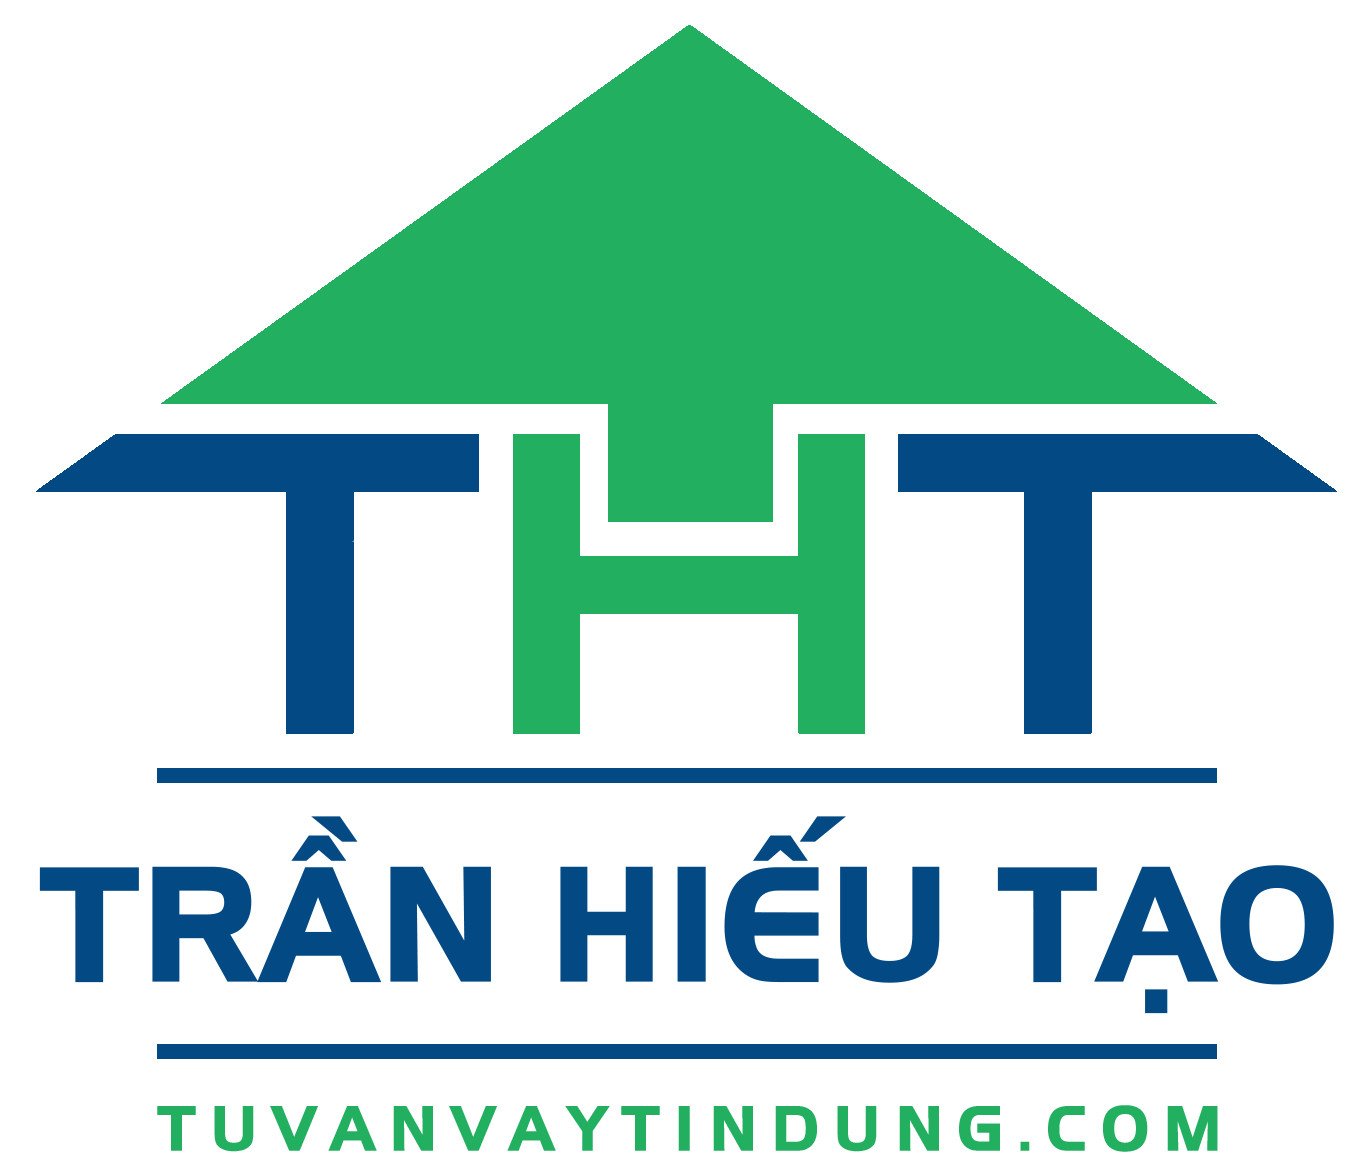 The logo of Tuvanvaytindung Tran Hieu Tao was built like a house, and coincides with the initials of Tran Hieu Tao.